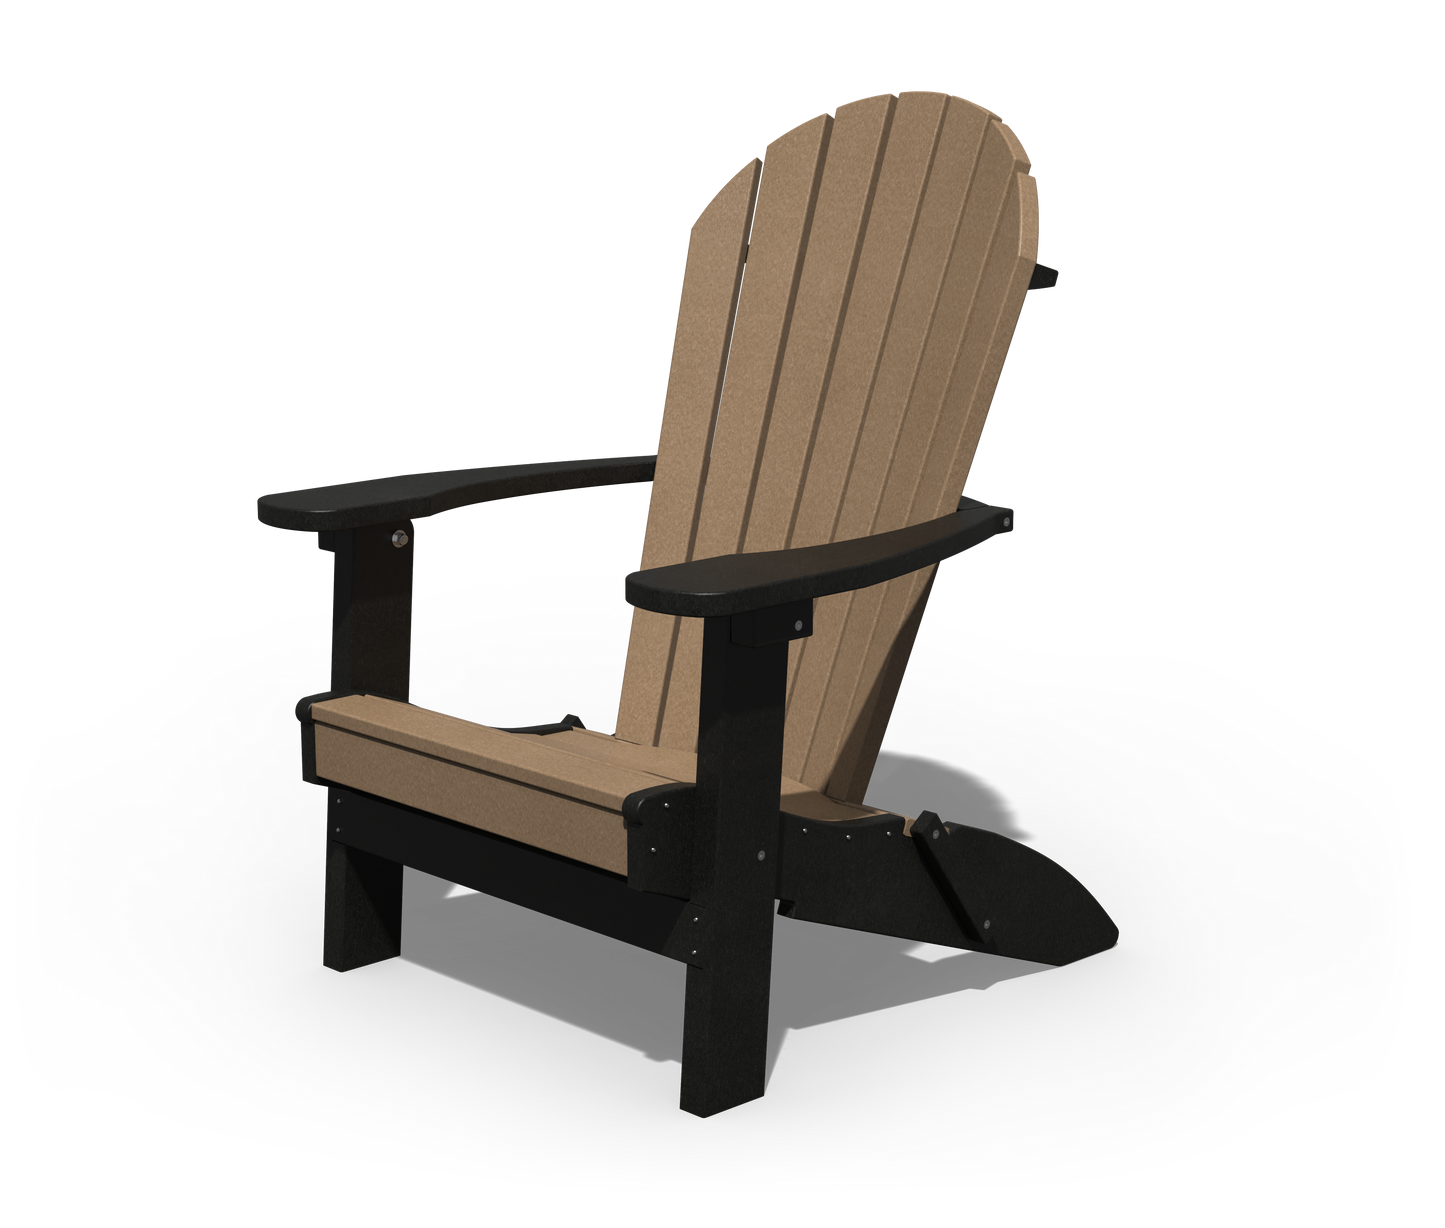 Patiova Recycled Plastic Amish Crafted Adirondack Folding Chair - LEAD TIME TO SHIP 4 WEEKS